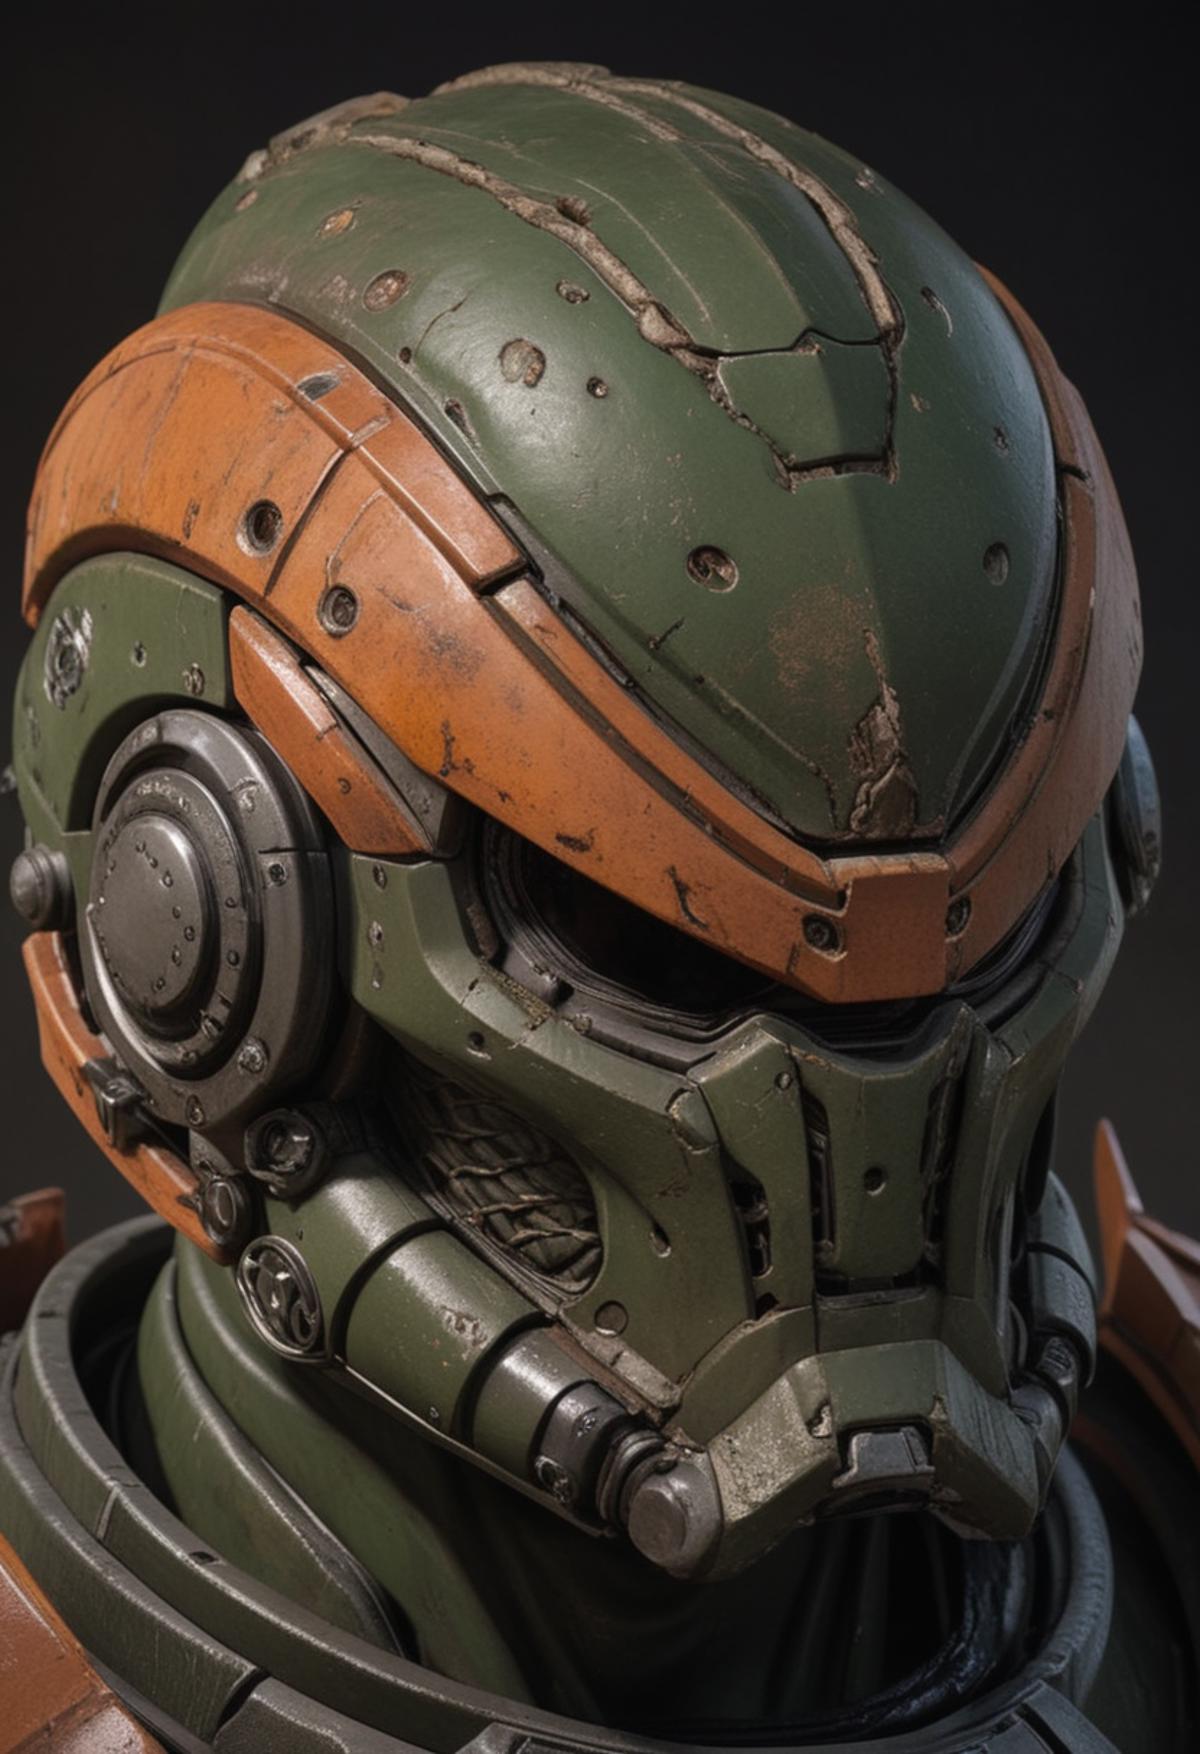 A detailed view of a green and orange robot helmet with a damaged face.